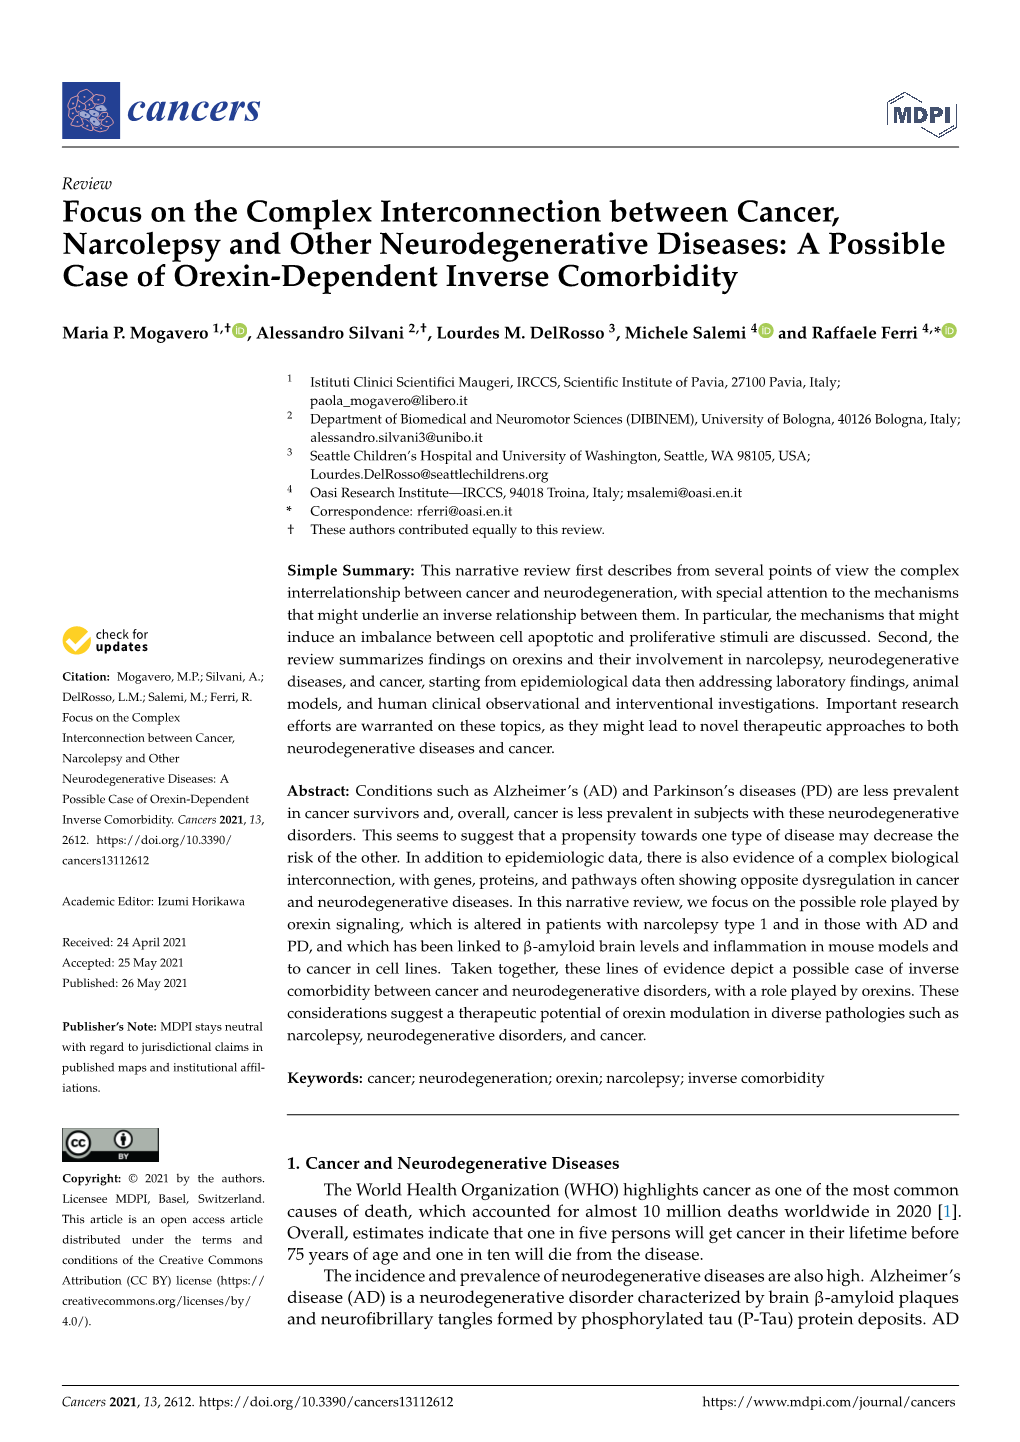 Focus on the Complex Interconnection Between Cancer, Narcolepsy and Other Neurodegenerative Diseases: a Possible Case of Orexin-Dependent Inverse Comorbidity